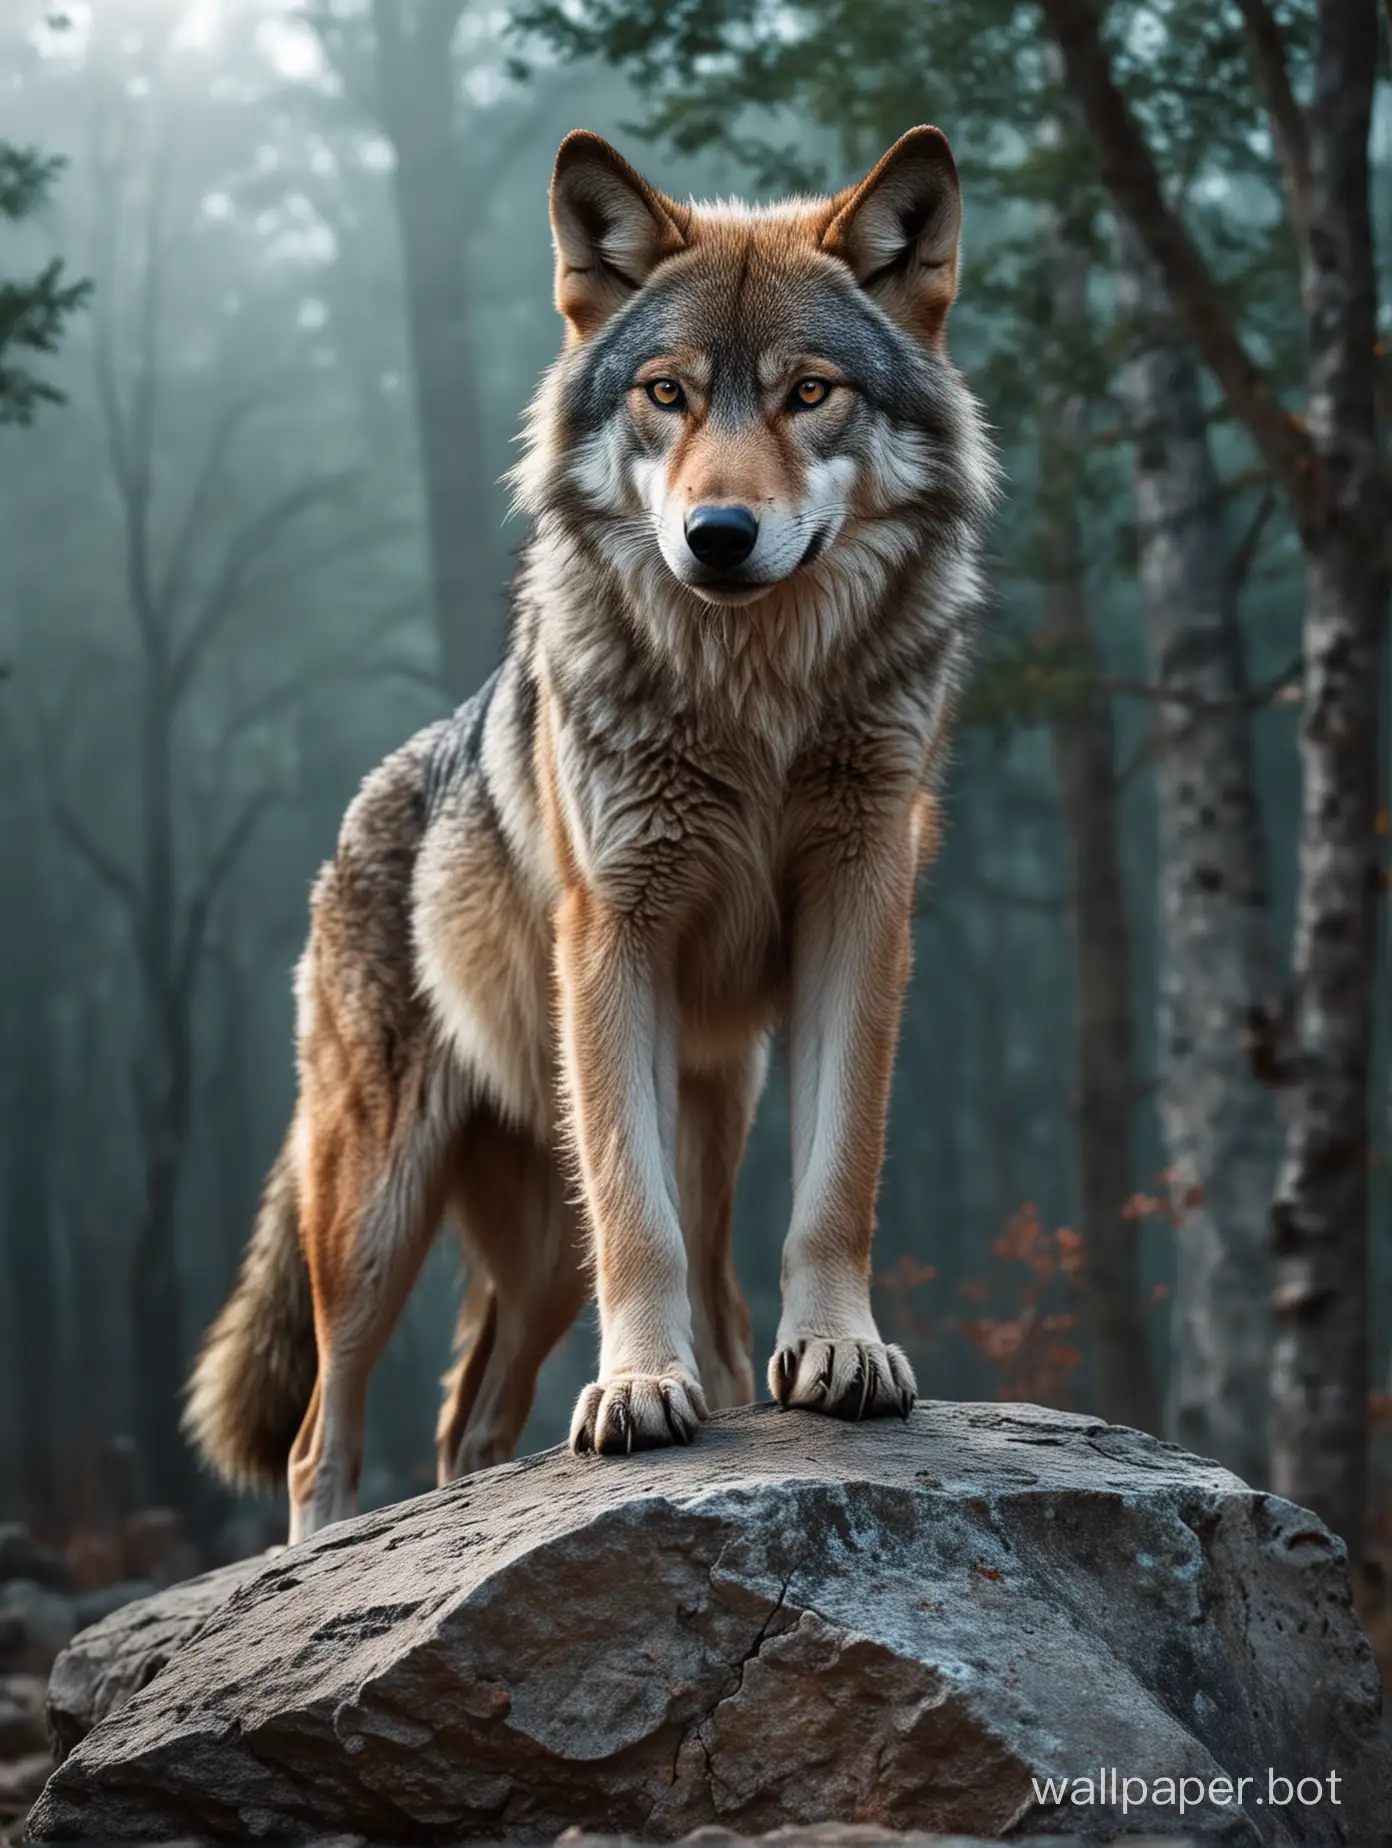 create a wallpaper of a wolf standing top of a rock. the image should be like it was taken from very close to the wolf. the colors should be very punchy. and the face of the wolf should be very angry. there should be a heroic look in the face of the wolf. make the background dim light. the eyes of the fox should be blue.